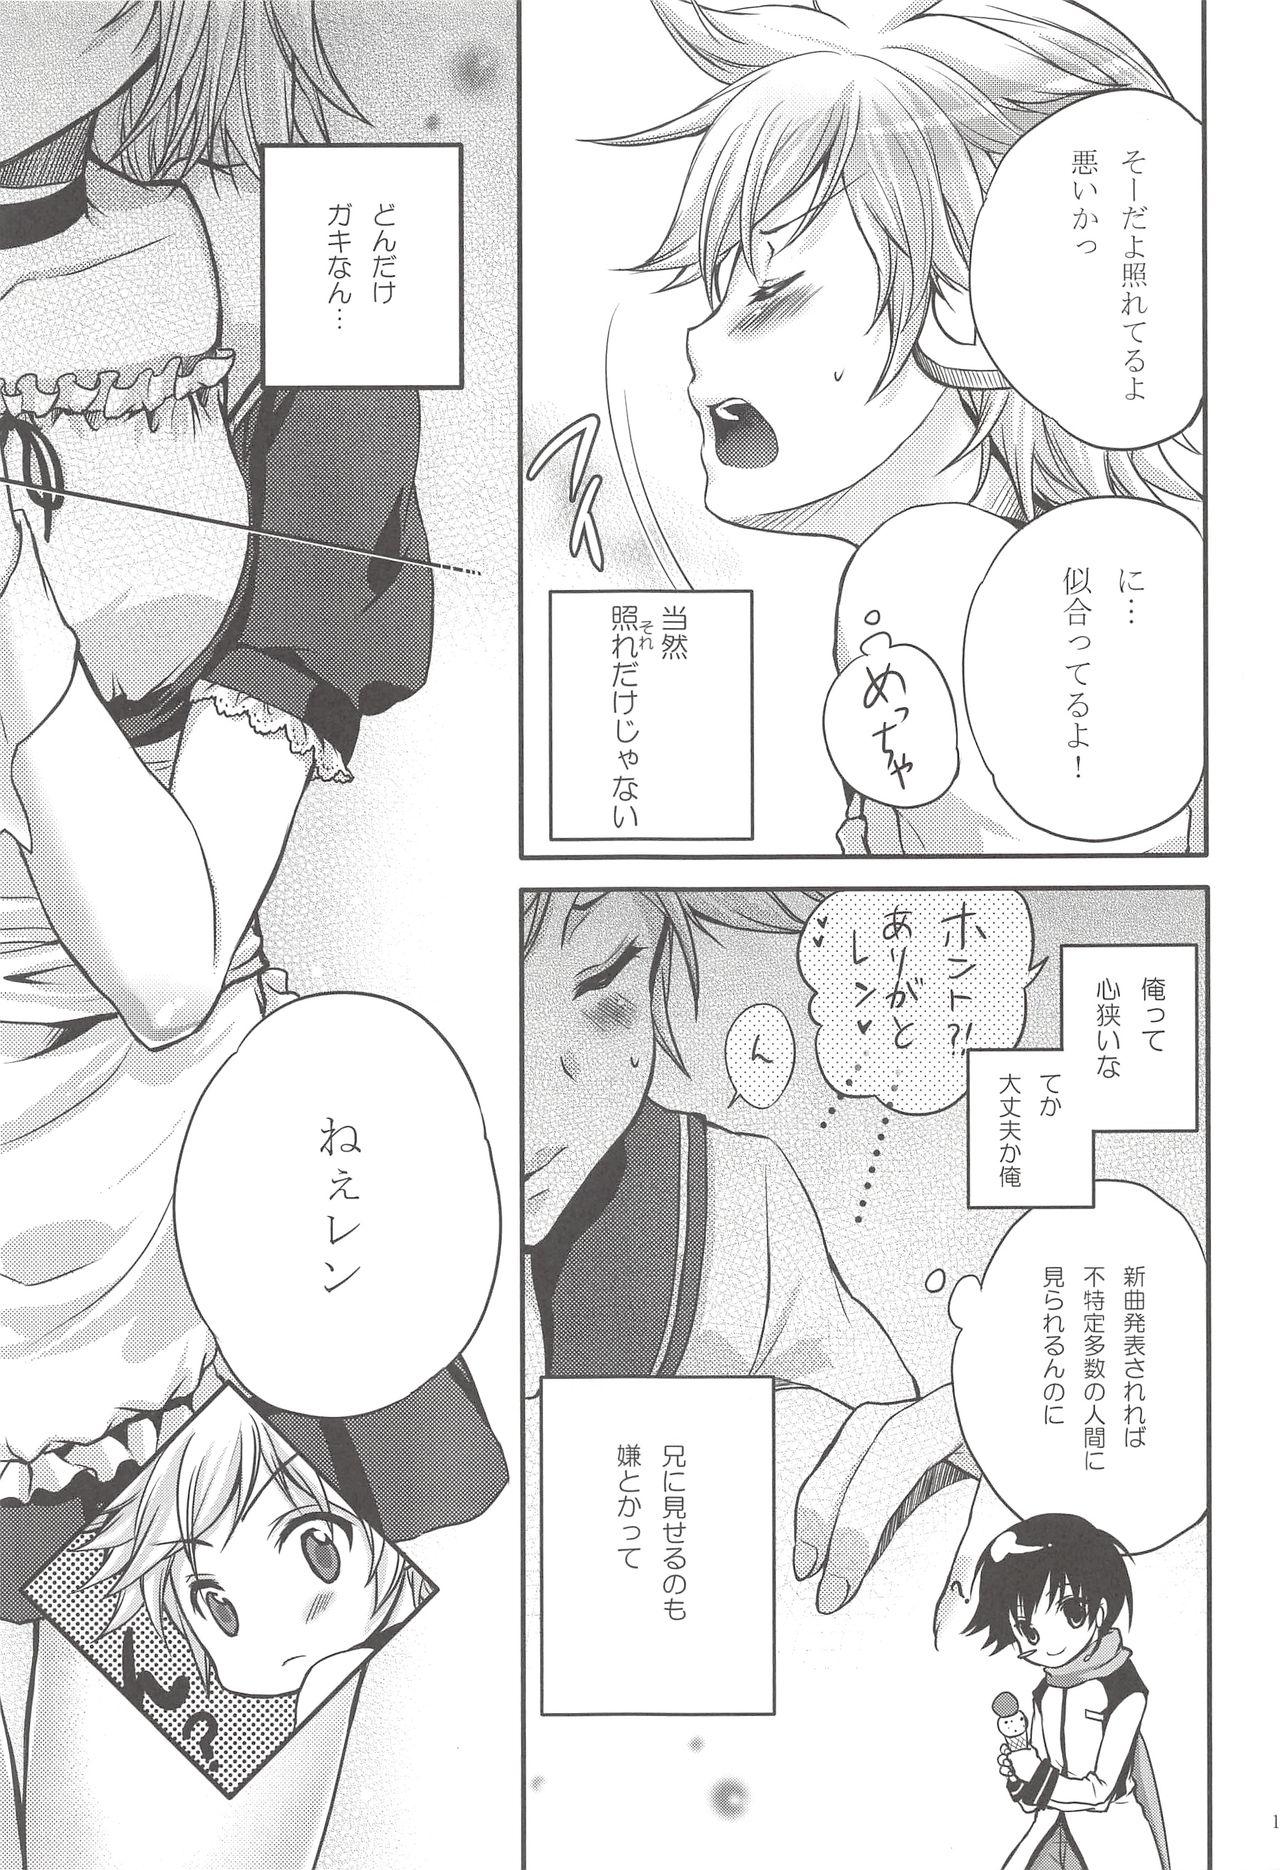 Webcamsex I serve domine - Vocaloid Ikillitts - Page 12